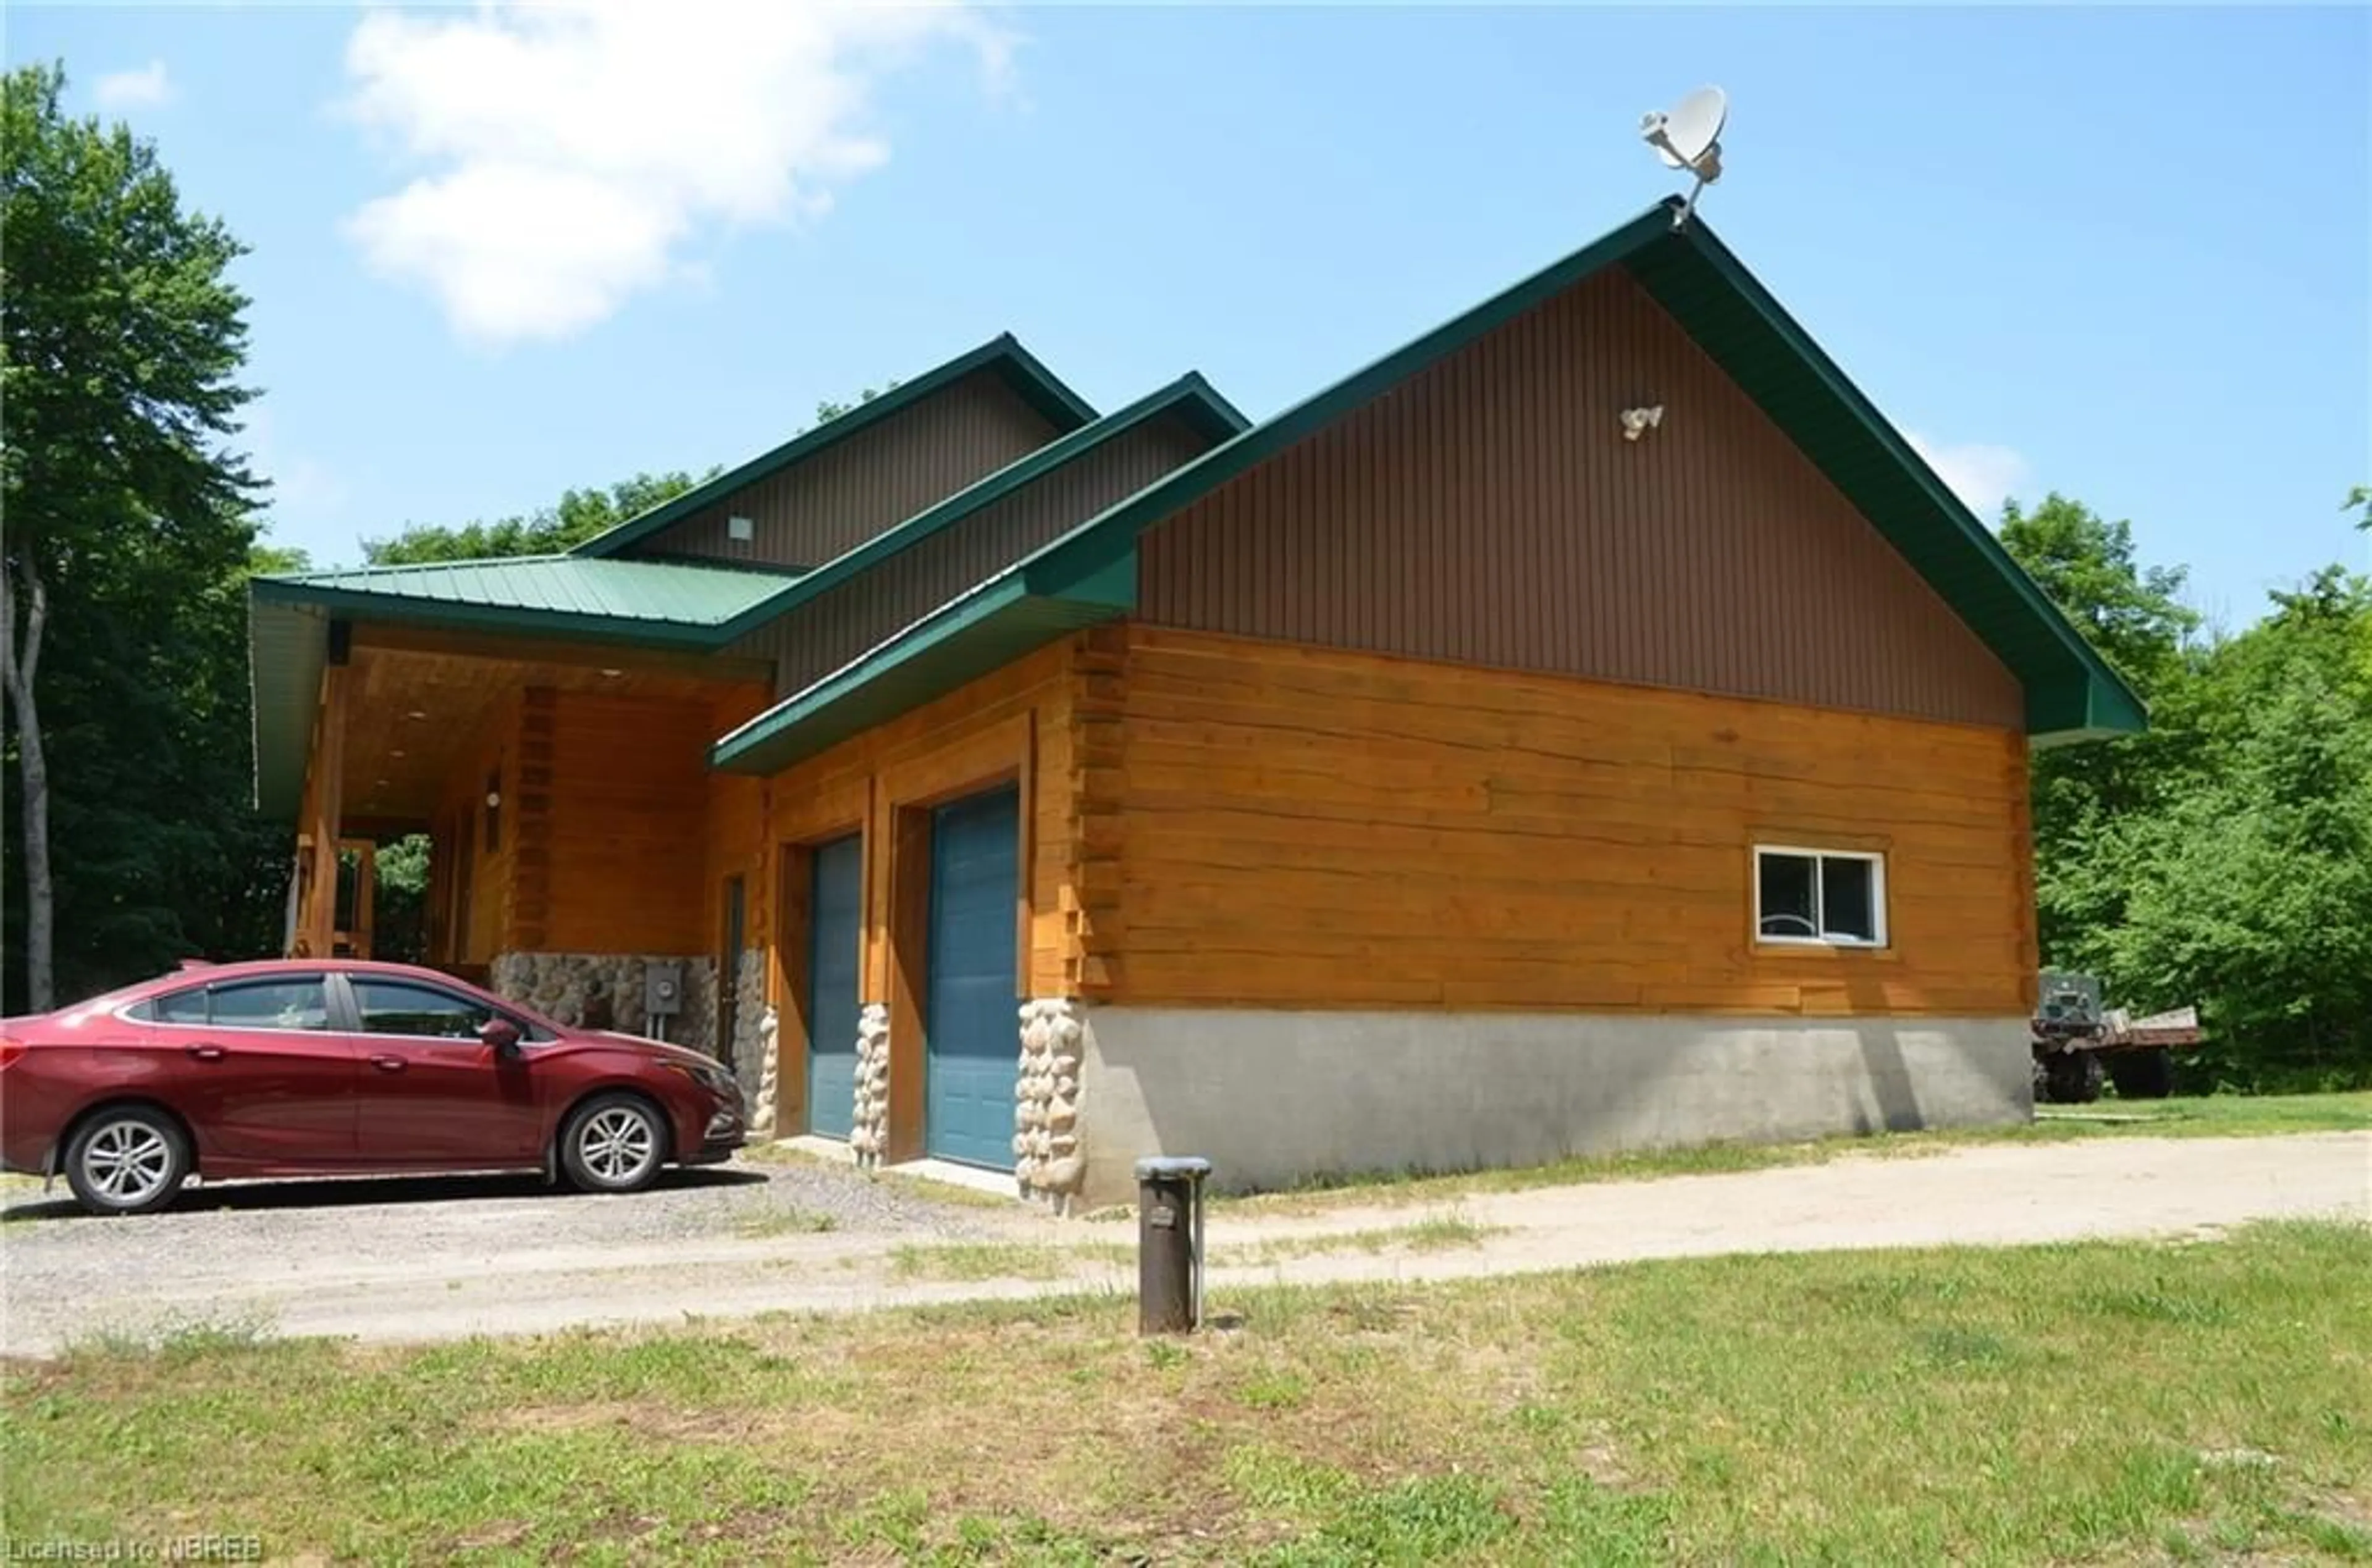 Outside view for 508 Main St, Trout Creek Ontario P0H 2L0